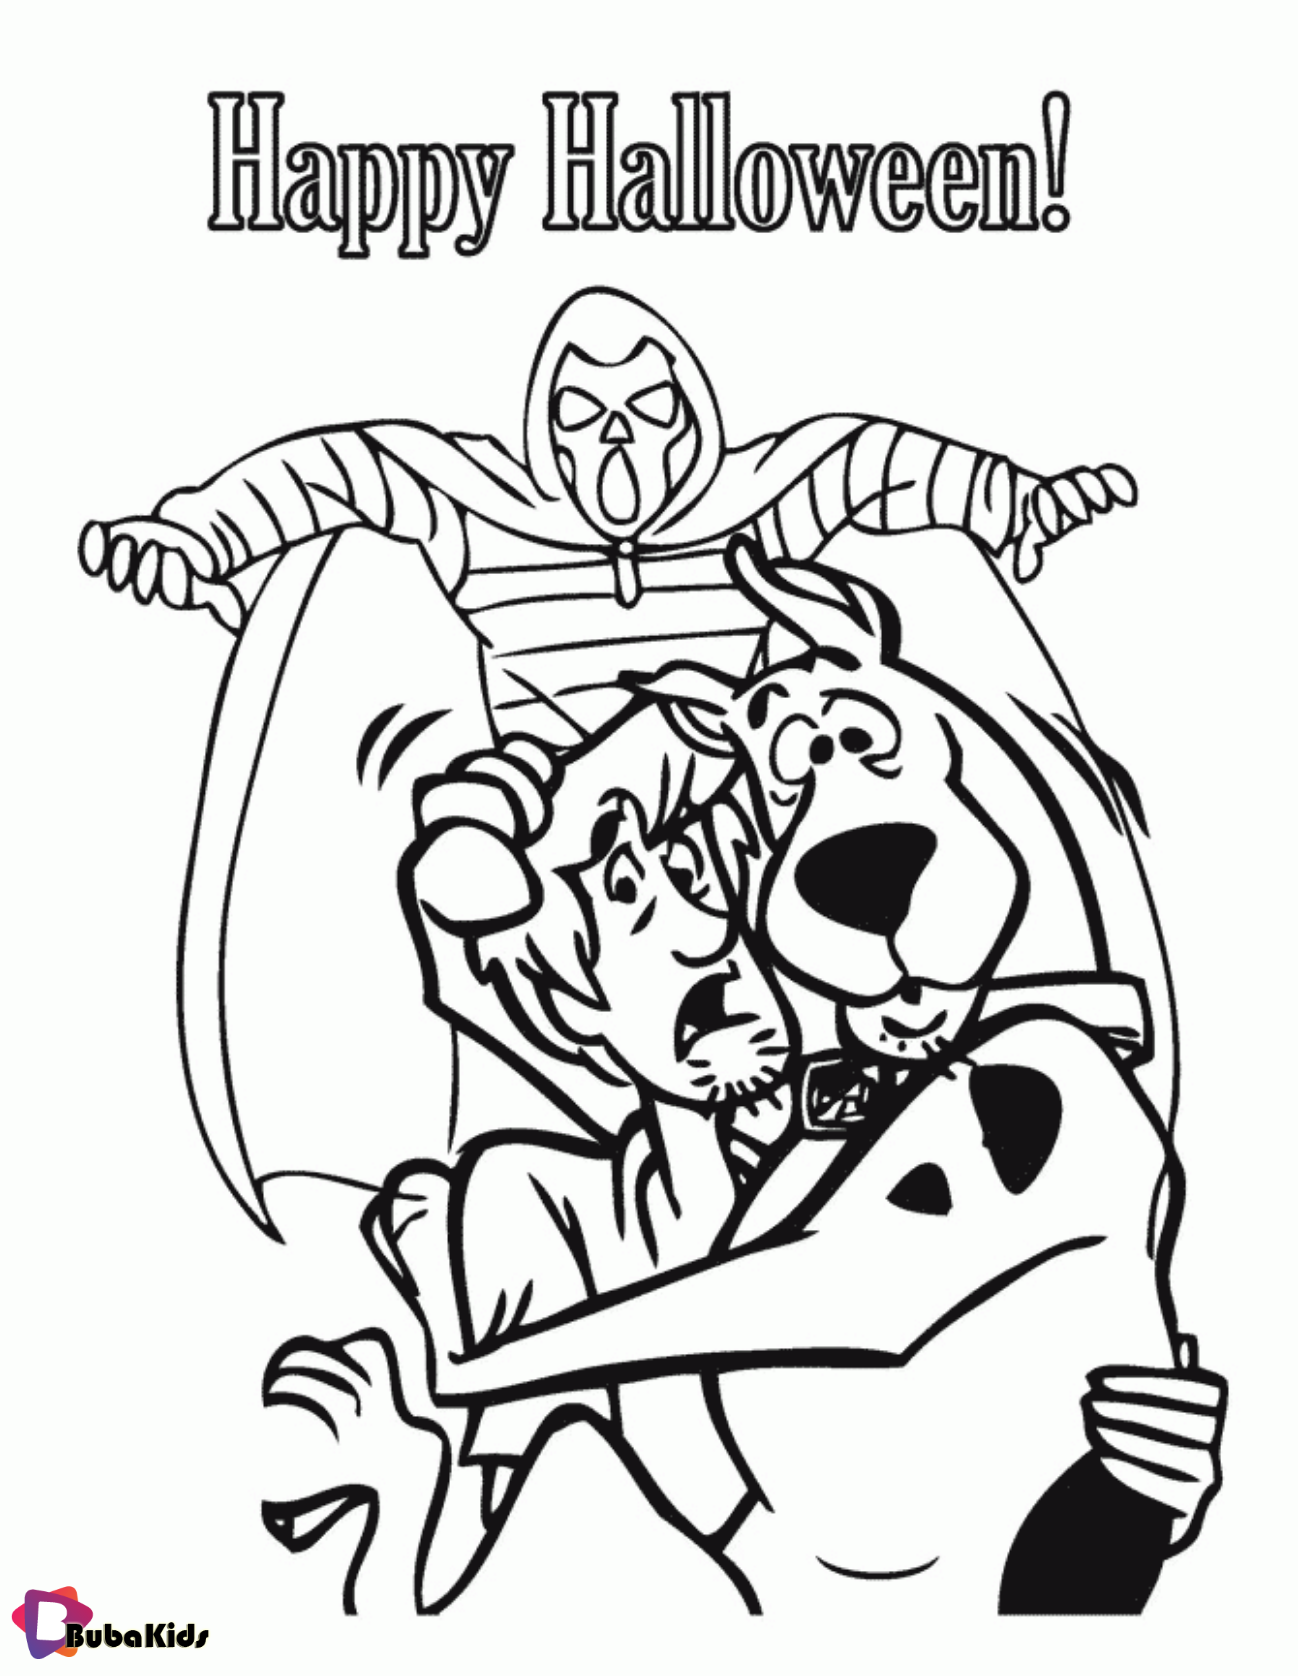 Happy Halloween Scooby Doo and Shaggy printable coloring page.